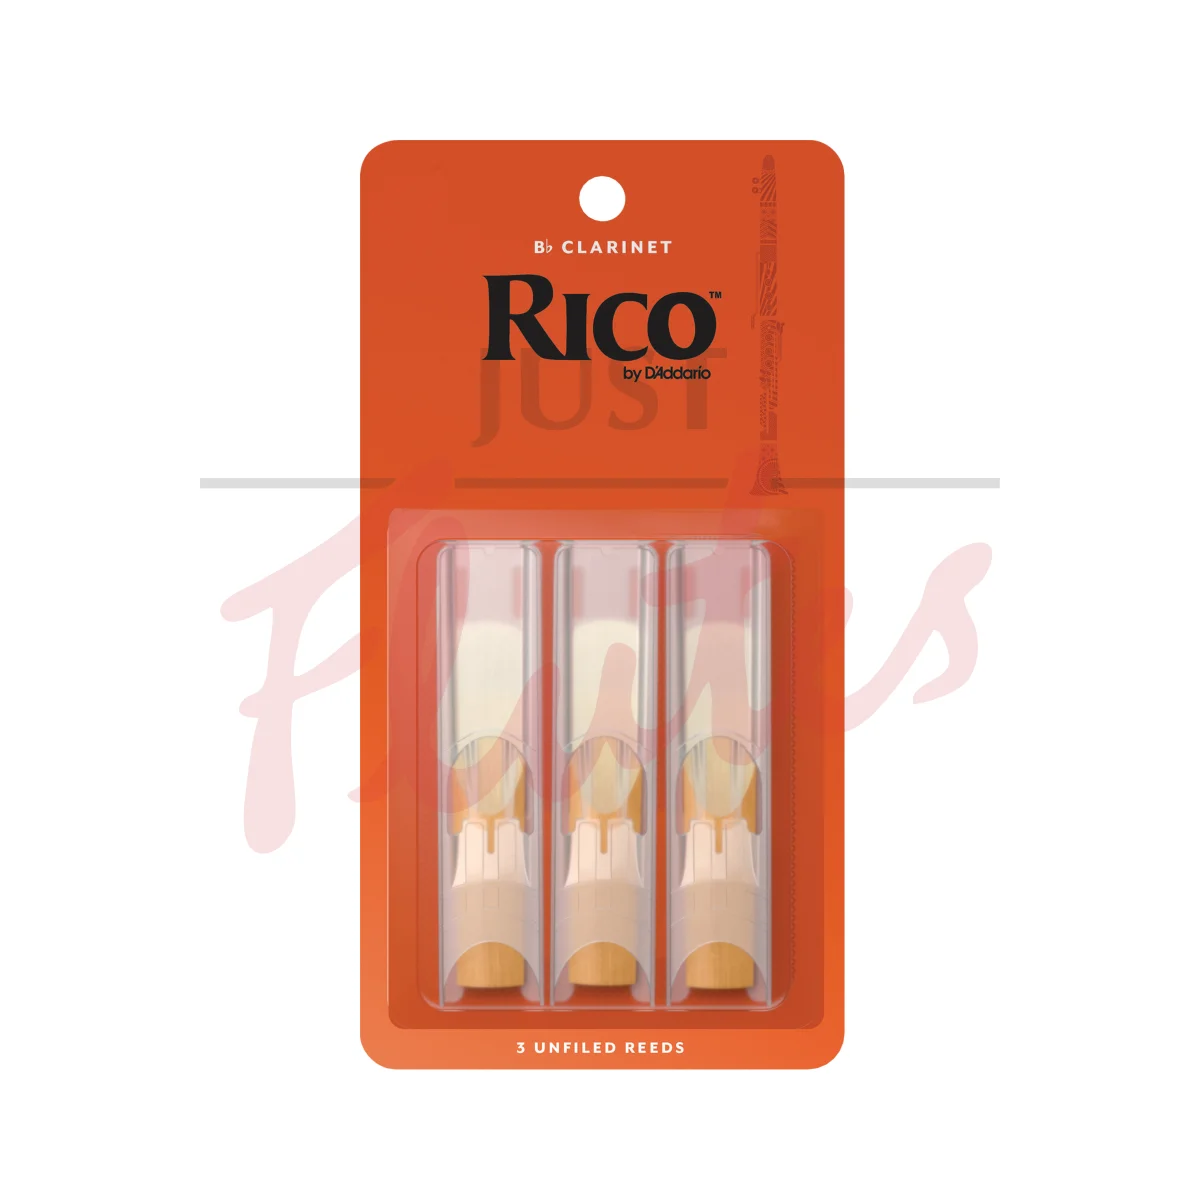 Rico by D'Addario RCA0330 Clarinet Reeds, Strength 3, Pack of 3